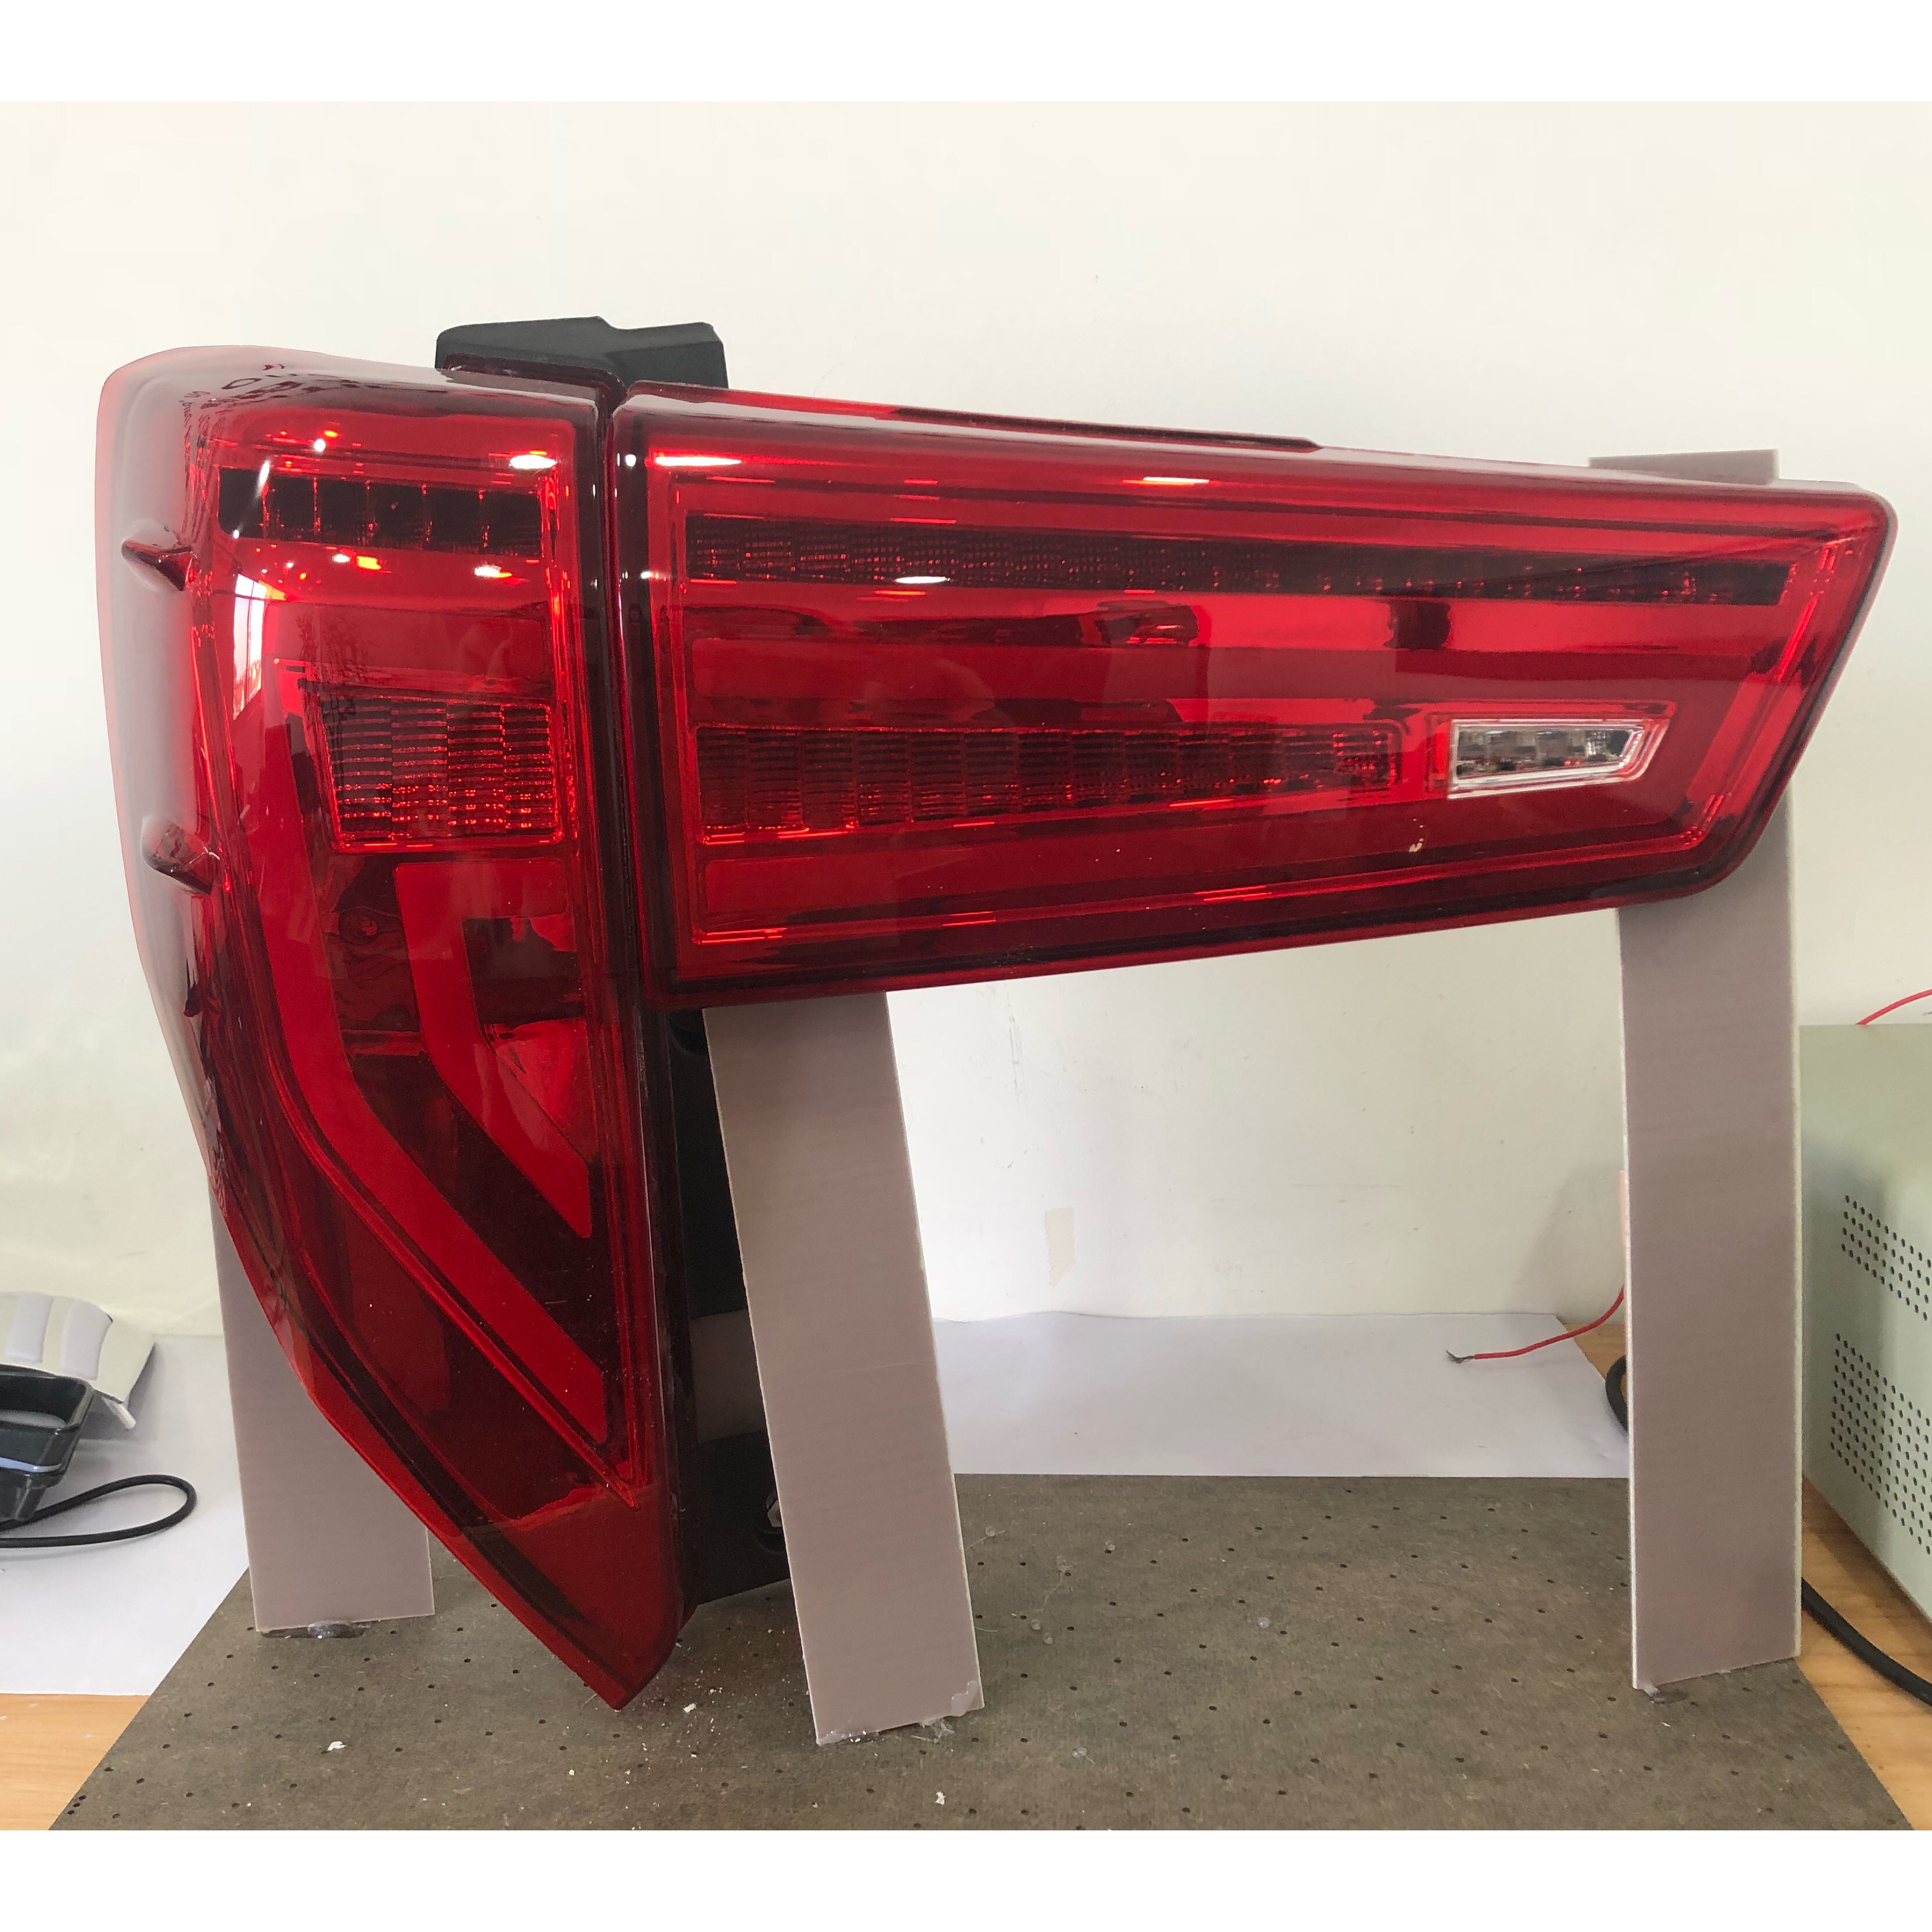 Wenye auto lamp led rear tail light for Innova tail lamp taillights made in changzhou